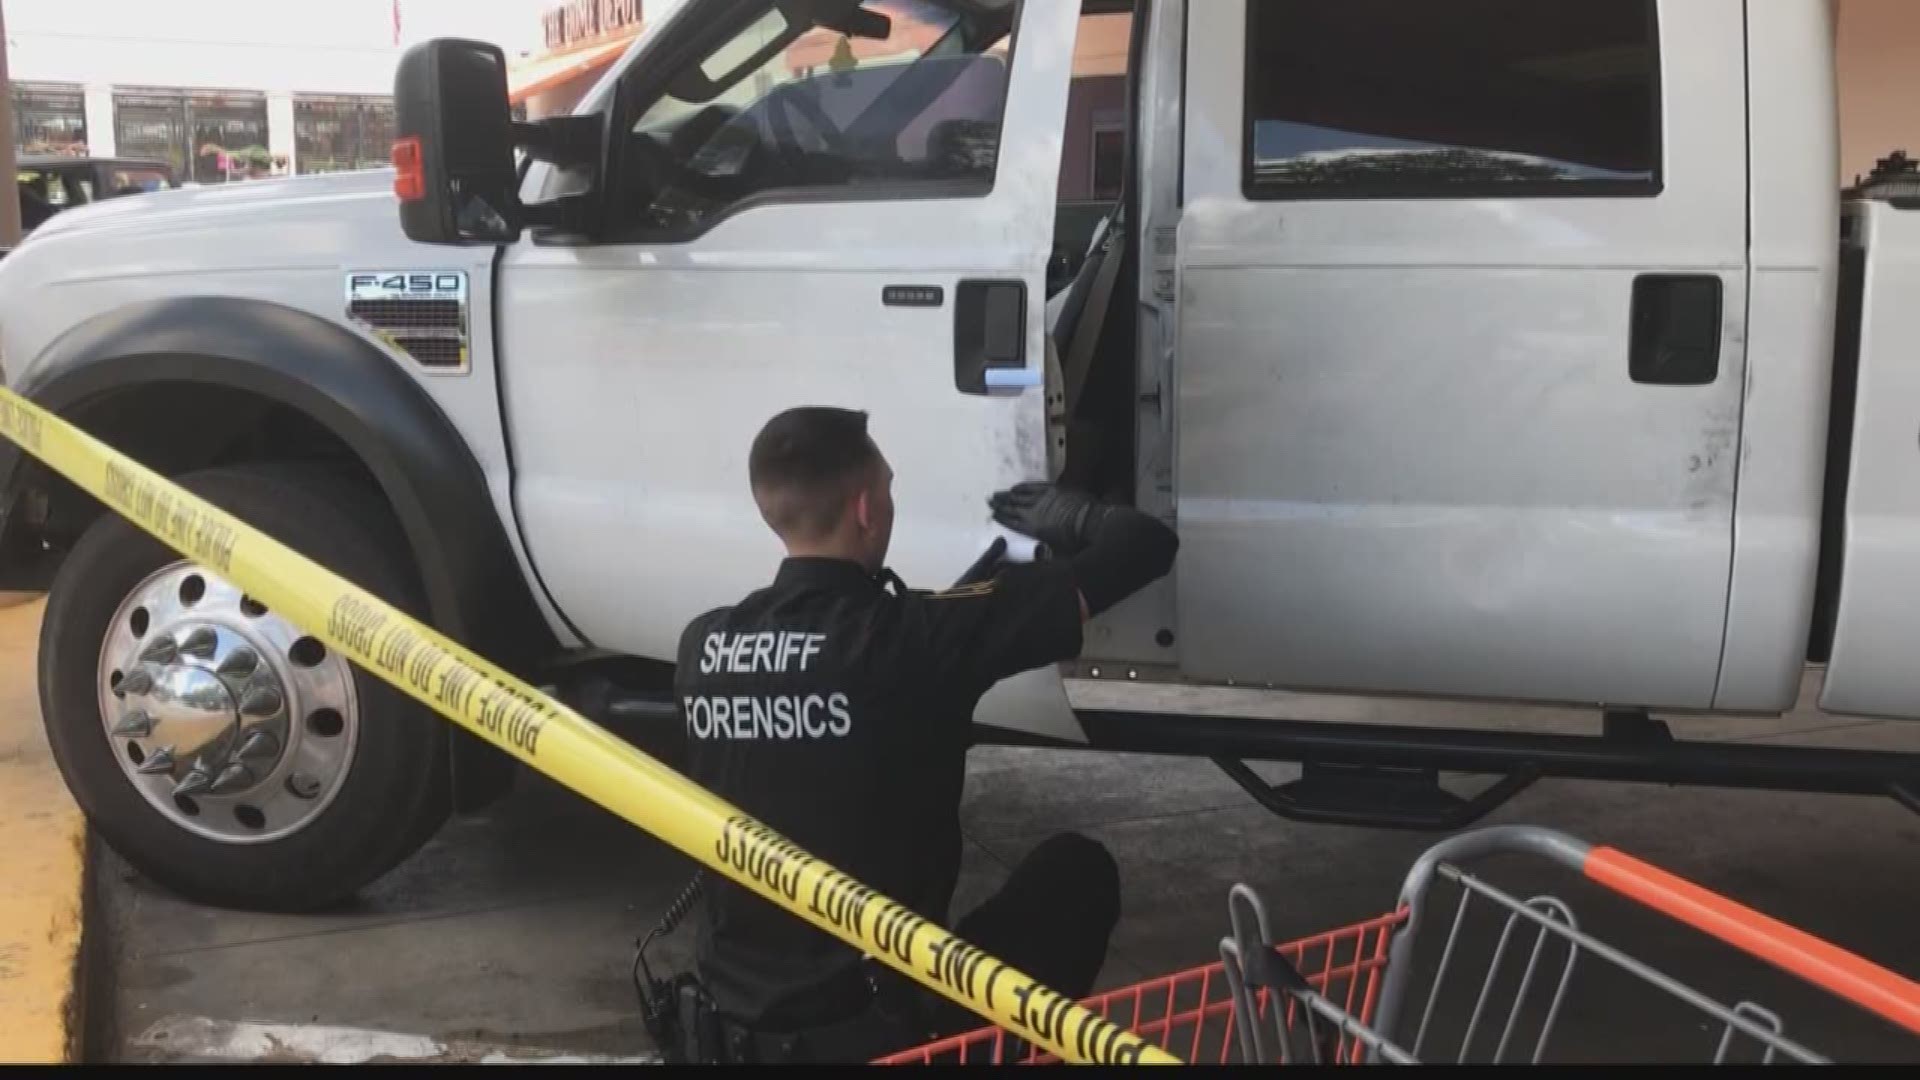 A hammer-wielding carjacker is on the run, and police aren't too sure where he's going next.

Officers responded just after 11 a.m. Wednesday to the Home Depot store on Gulf to Bay Boulevard, where they say a man stole a hammer.

He took off and tried to carjack a white Ford pick-up truck. The victim fought him off, and the suspect swiped a 2007 silver Dodge 3500 Megacab truck.